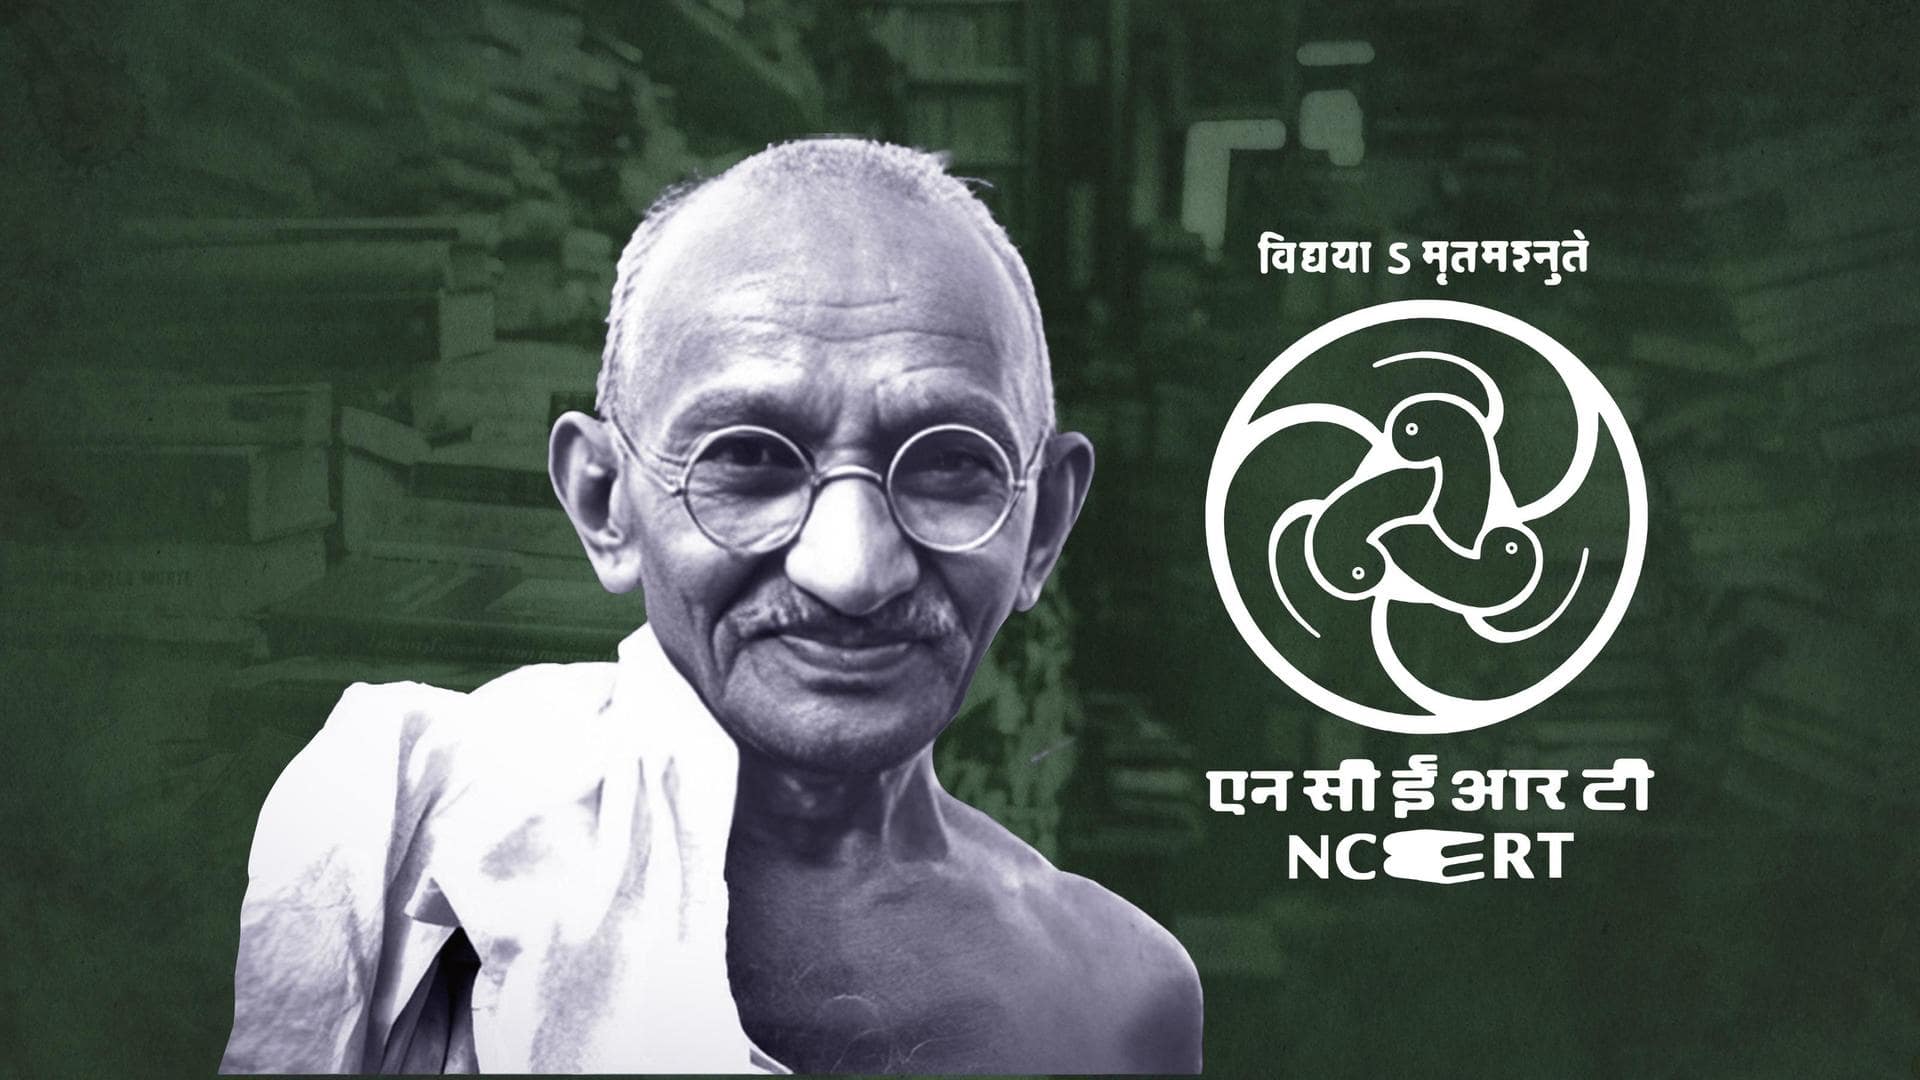 Know about NCERT controversy on Mahatma Gandhi, Hindu-Muslim unity, RSS